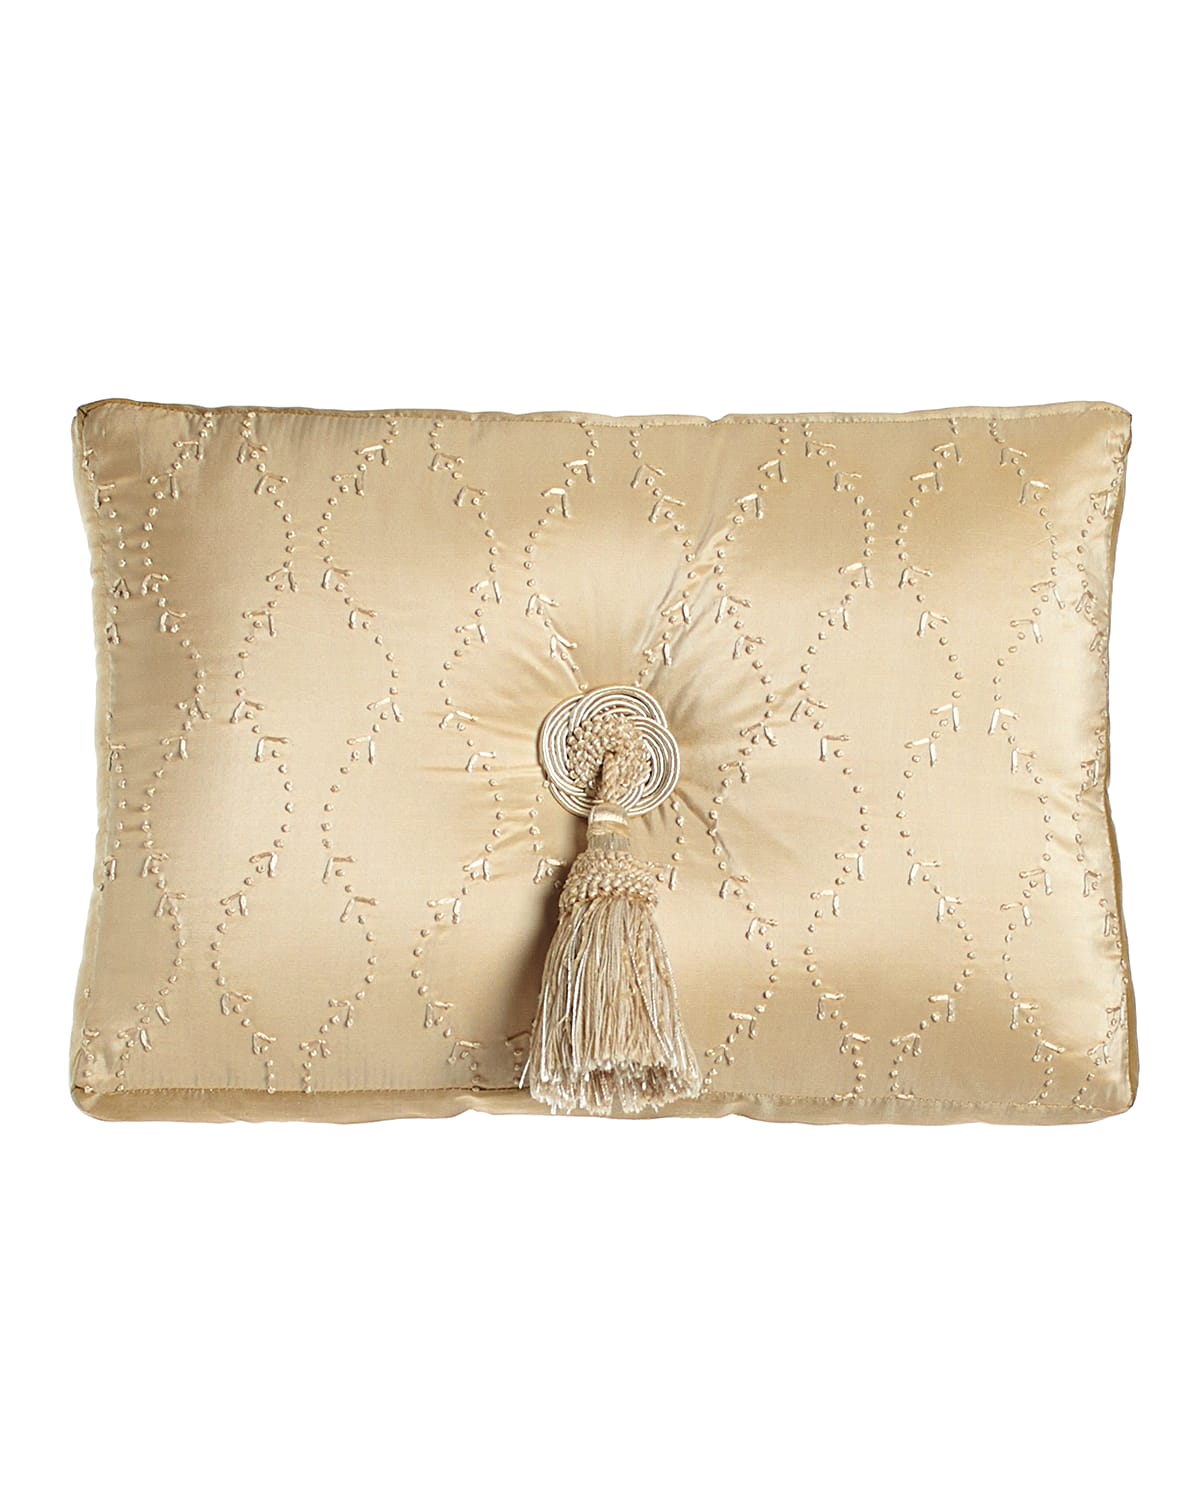 Image Austin Horn Collection Concord 13" x 18" Embroidered Silk Pillow with Center Tassel